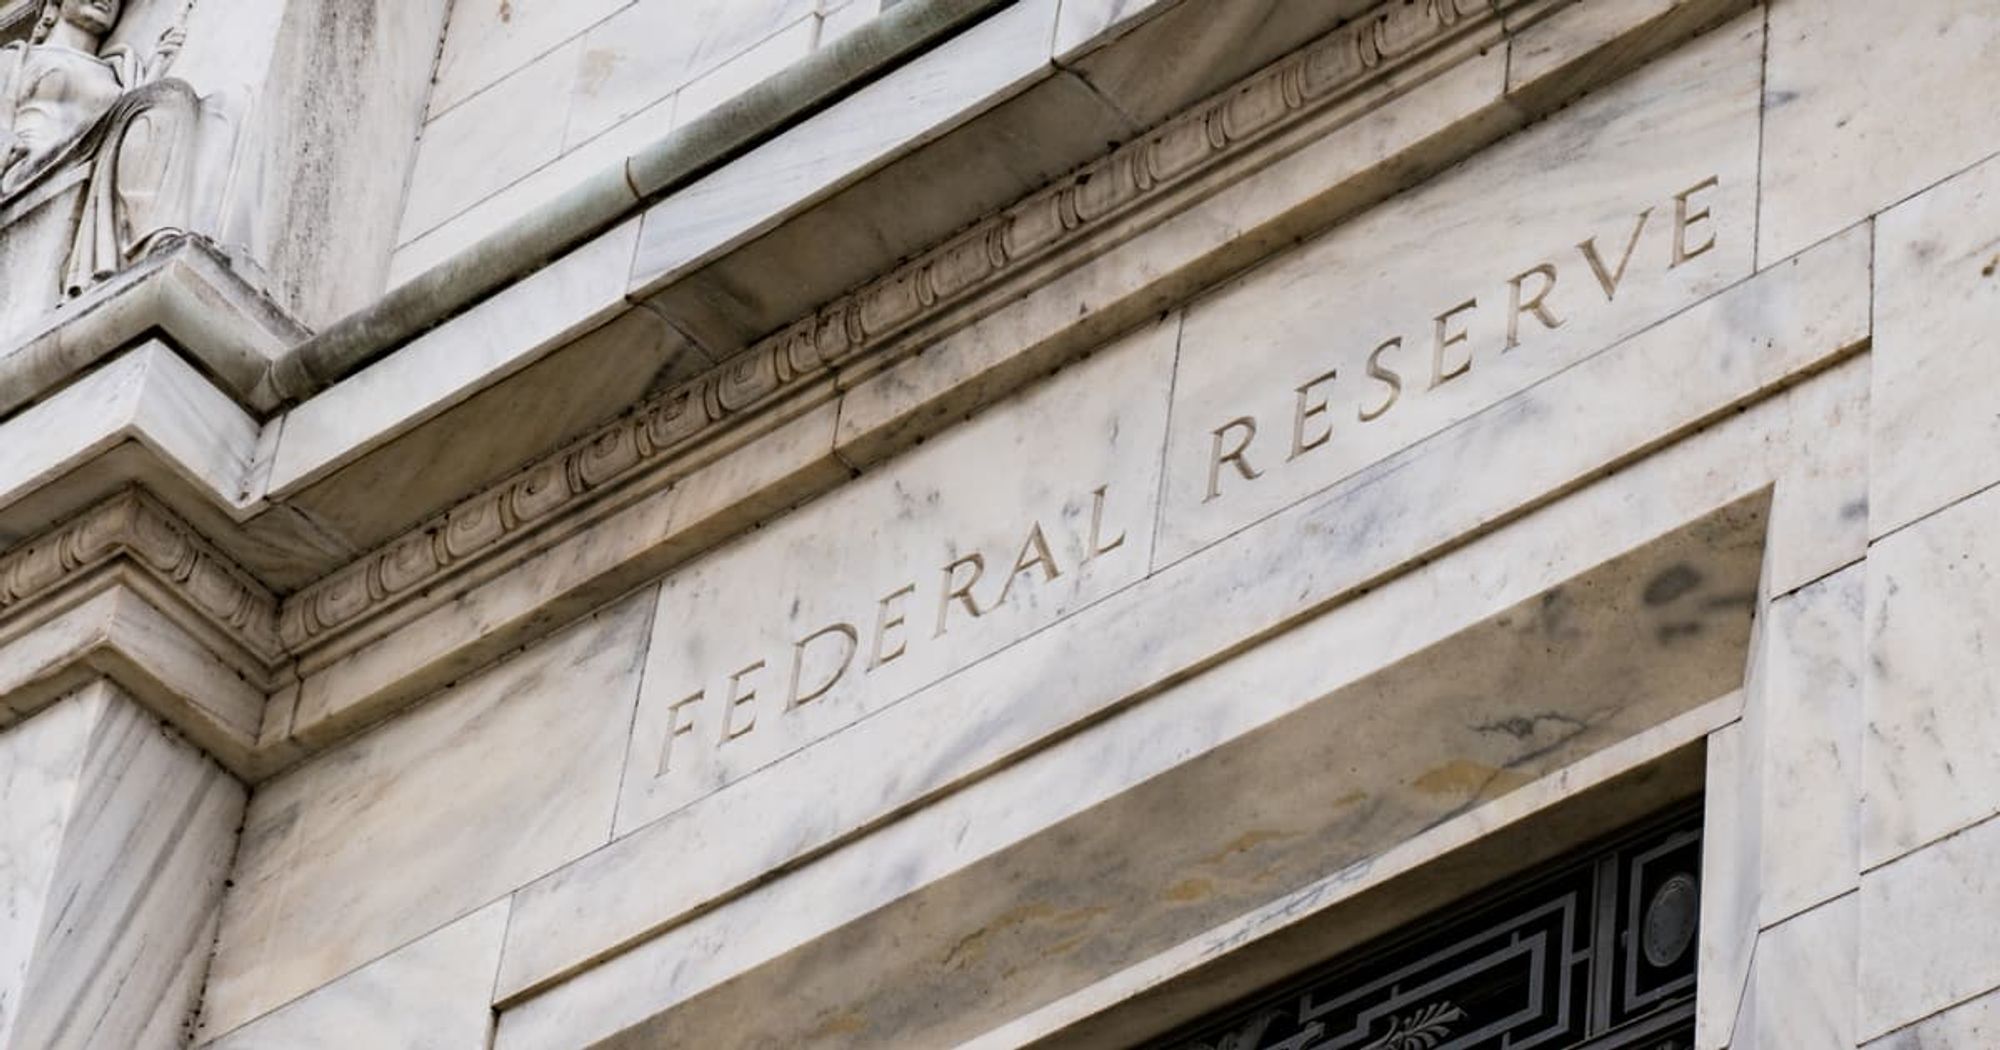 Galaxy Digital CEO Says Powell’s 2nd-Term at US Fed Reserve Could Hurt Crypto Market | Blockchain News